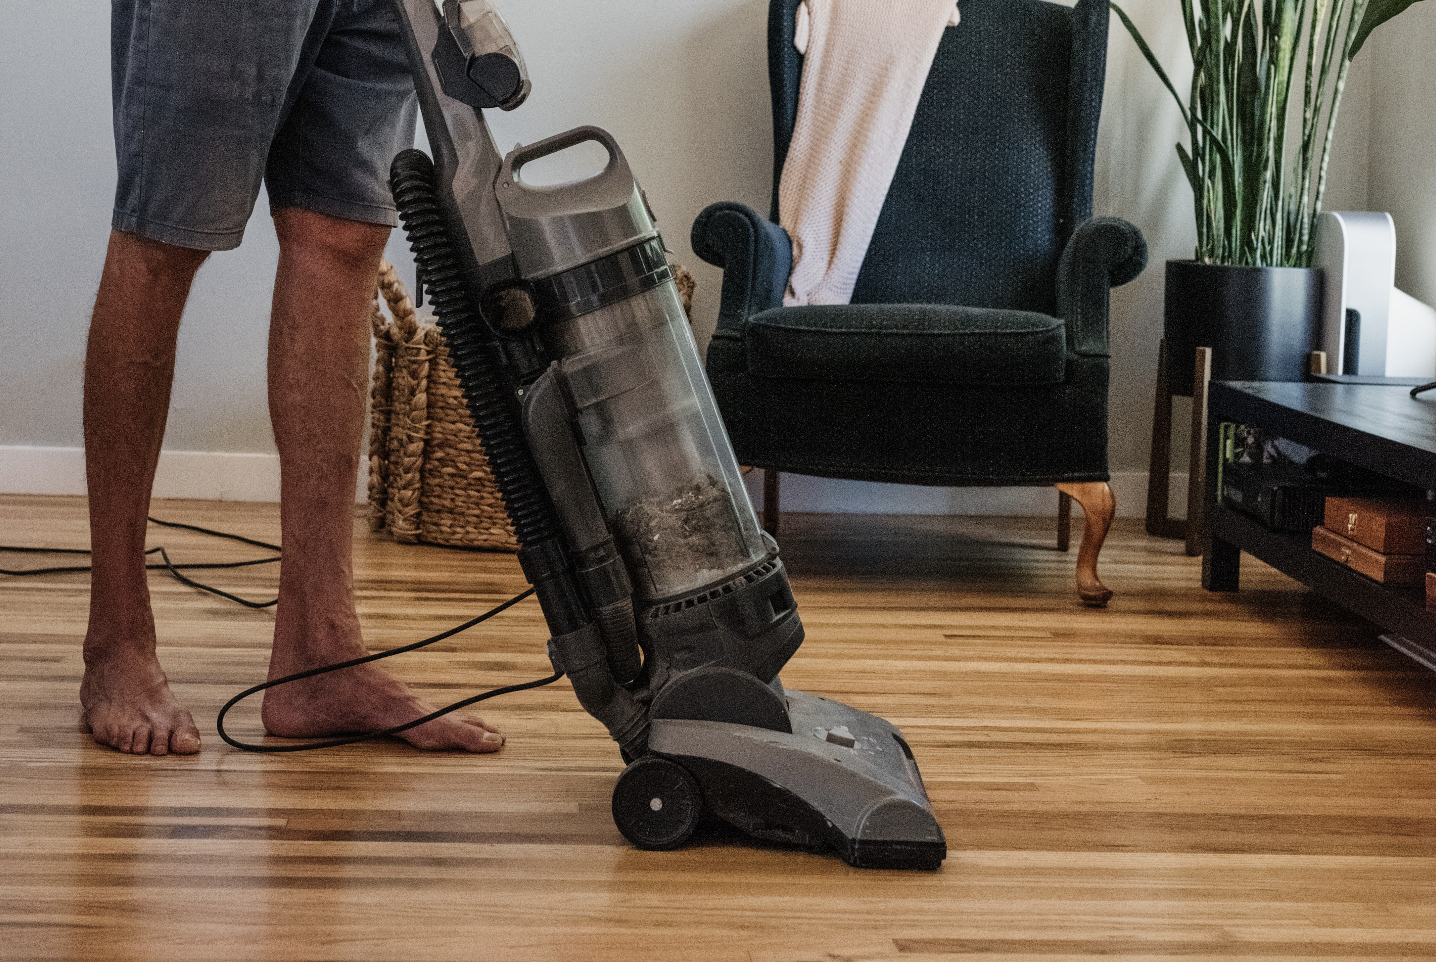 The Top 10 Vacuum Cleaners to Keep Your Home Spick and Span